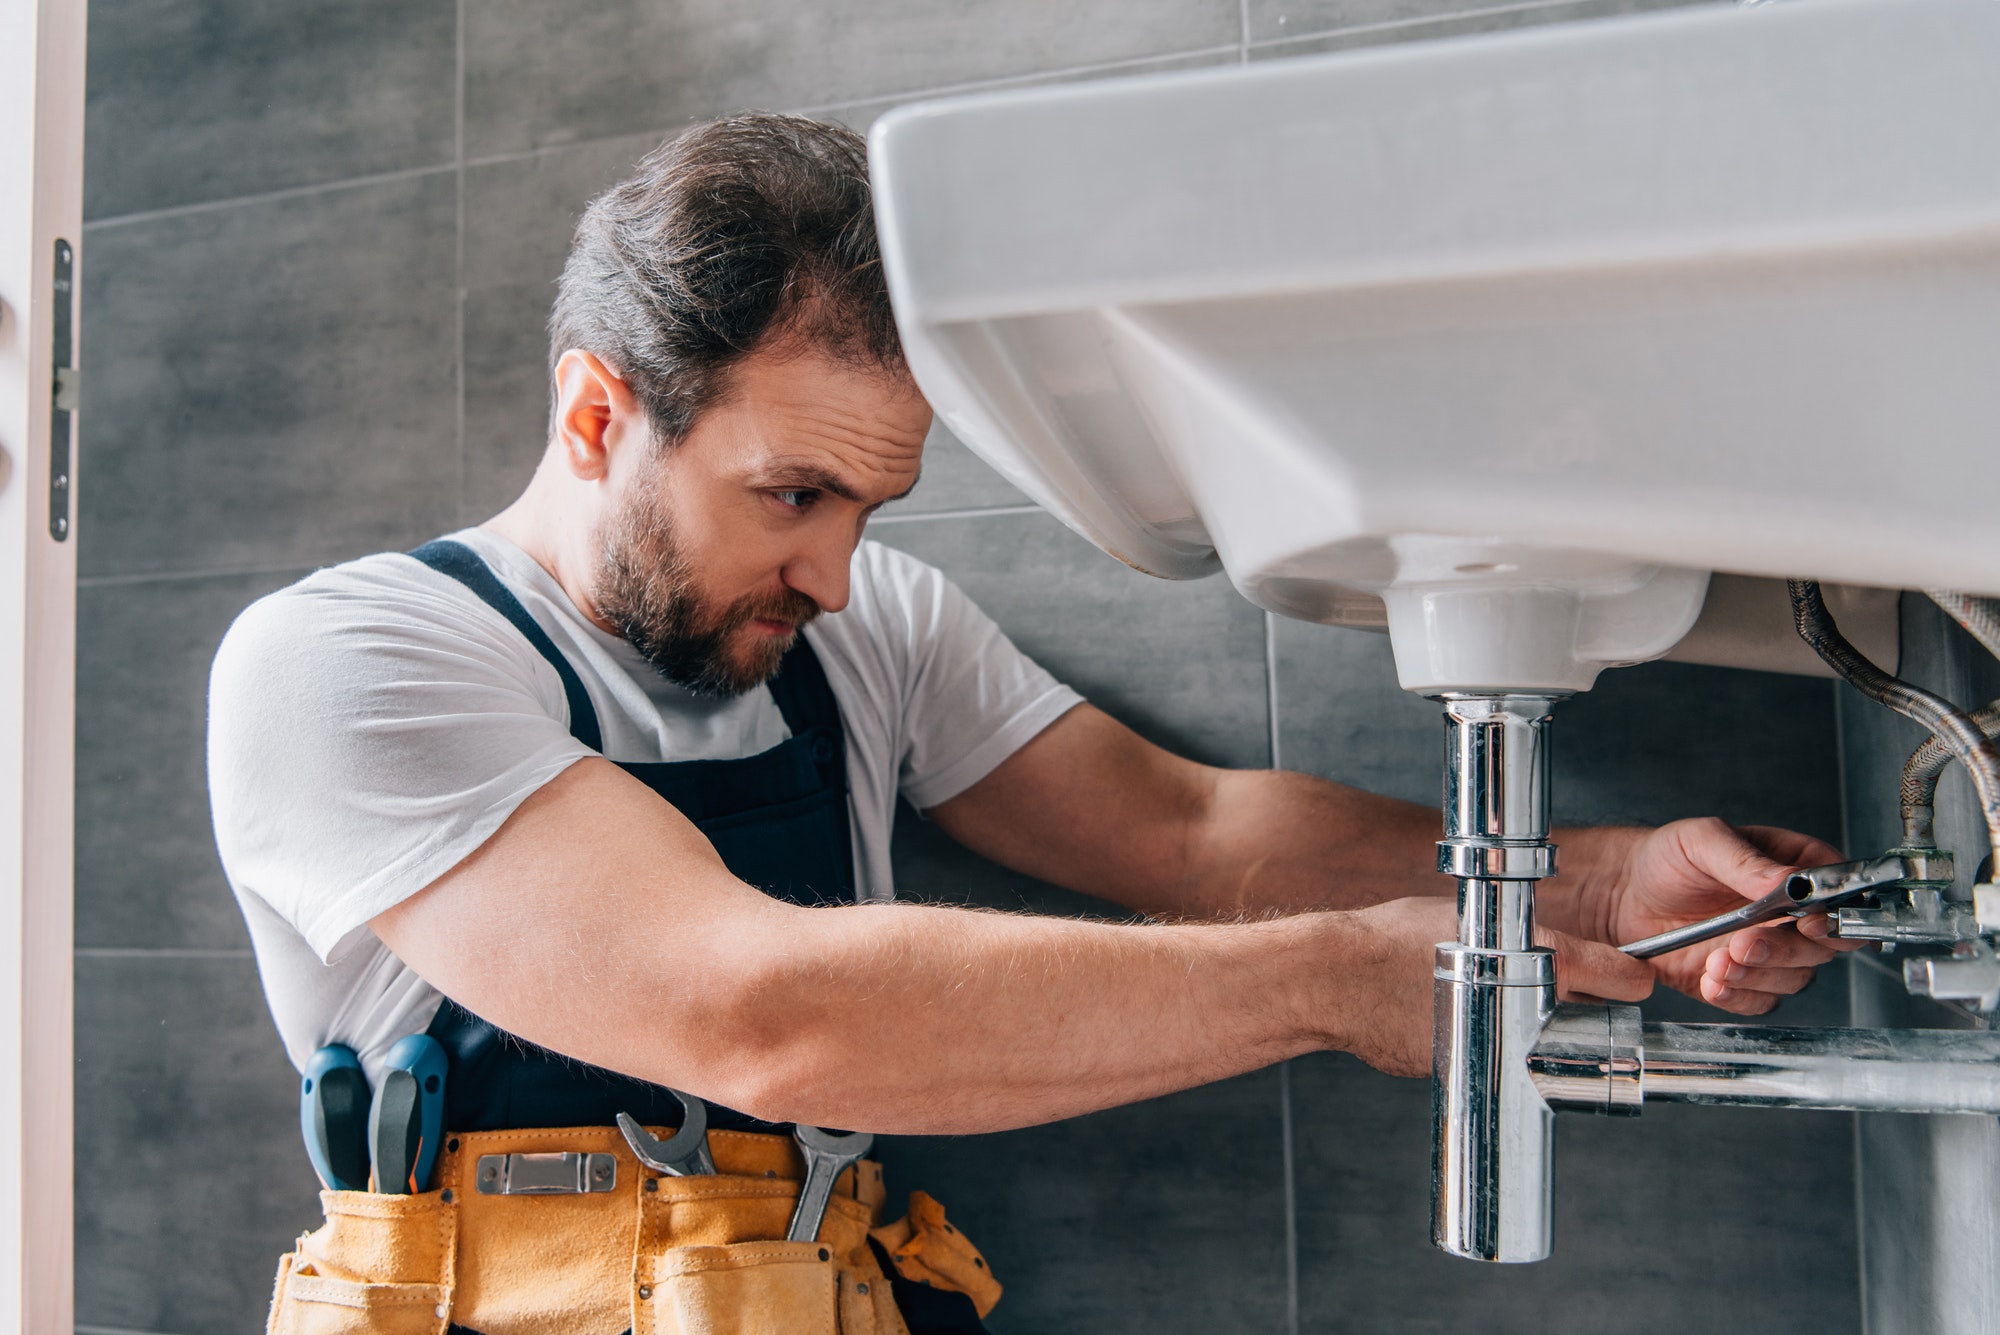 Best Plumbing Services in Arlington, VA: Your Trusted Partners for Expert Solutions and Peace of Mind